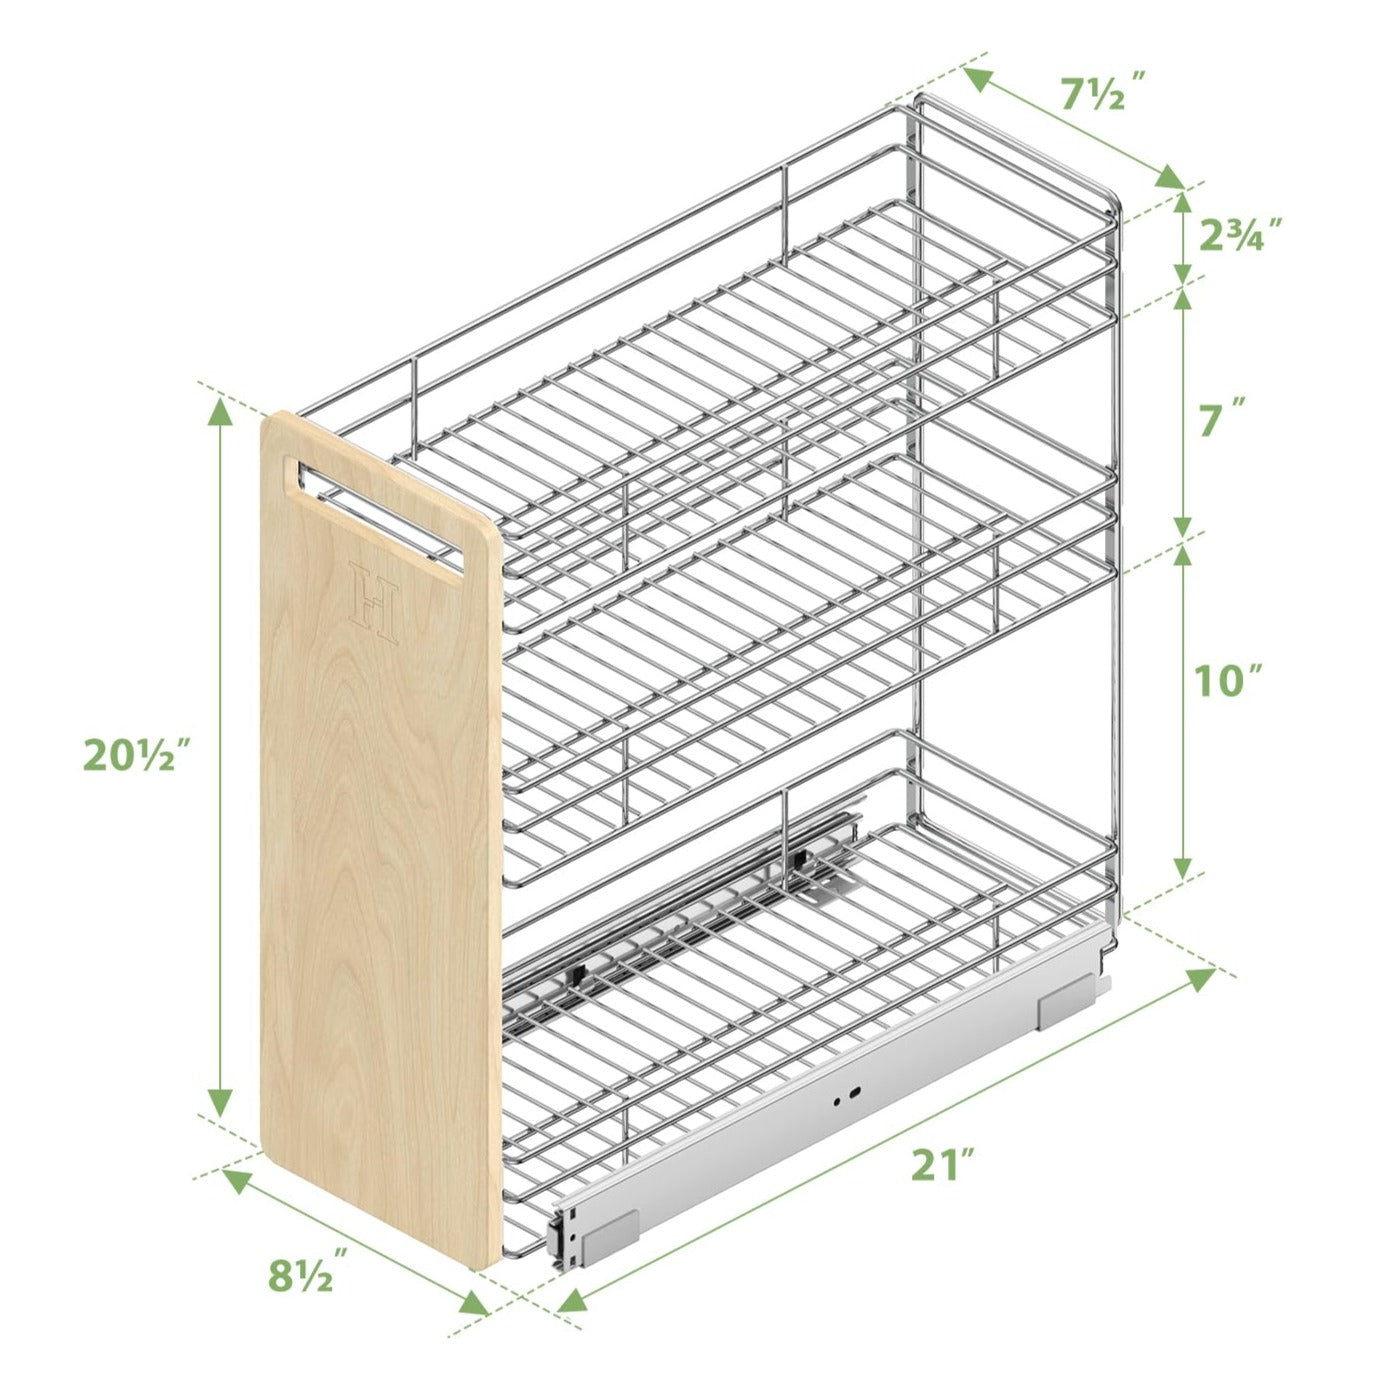 3-Tier Pull-Out Shelf With Wooden Handle Planks